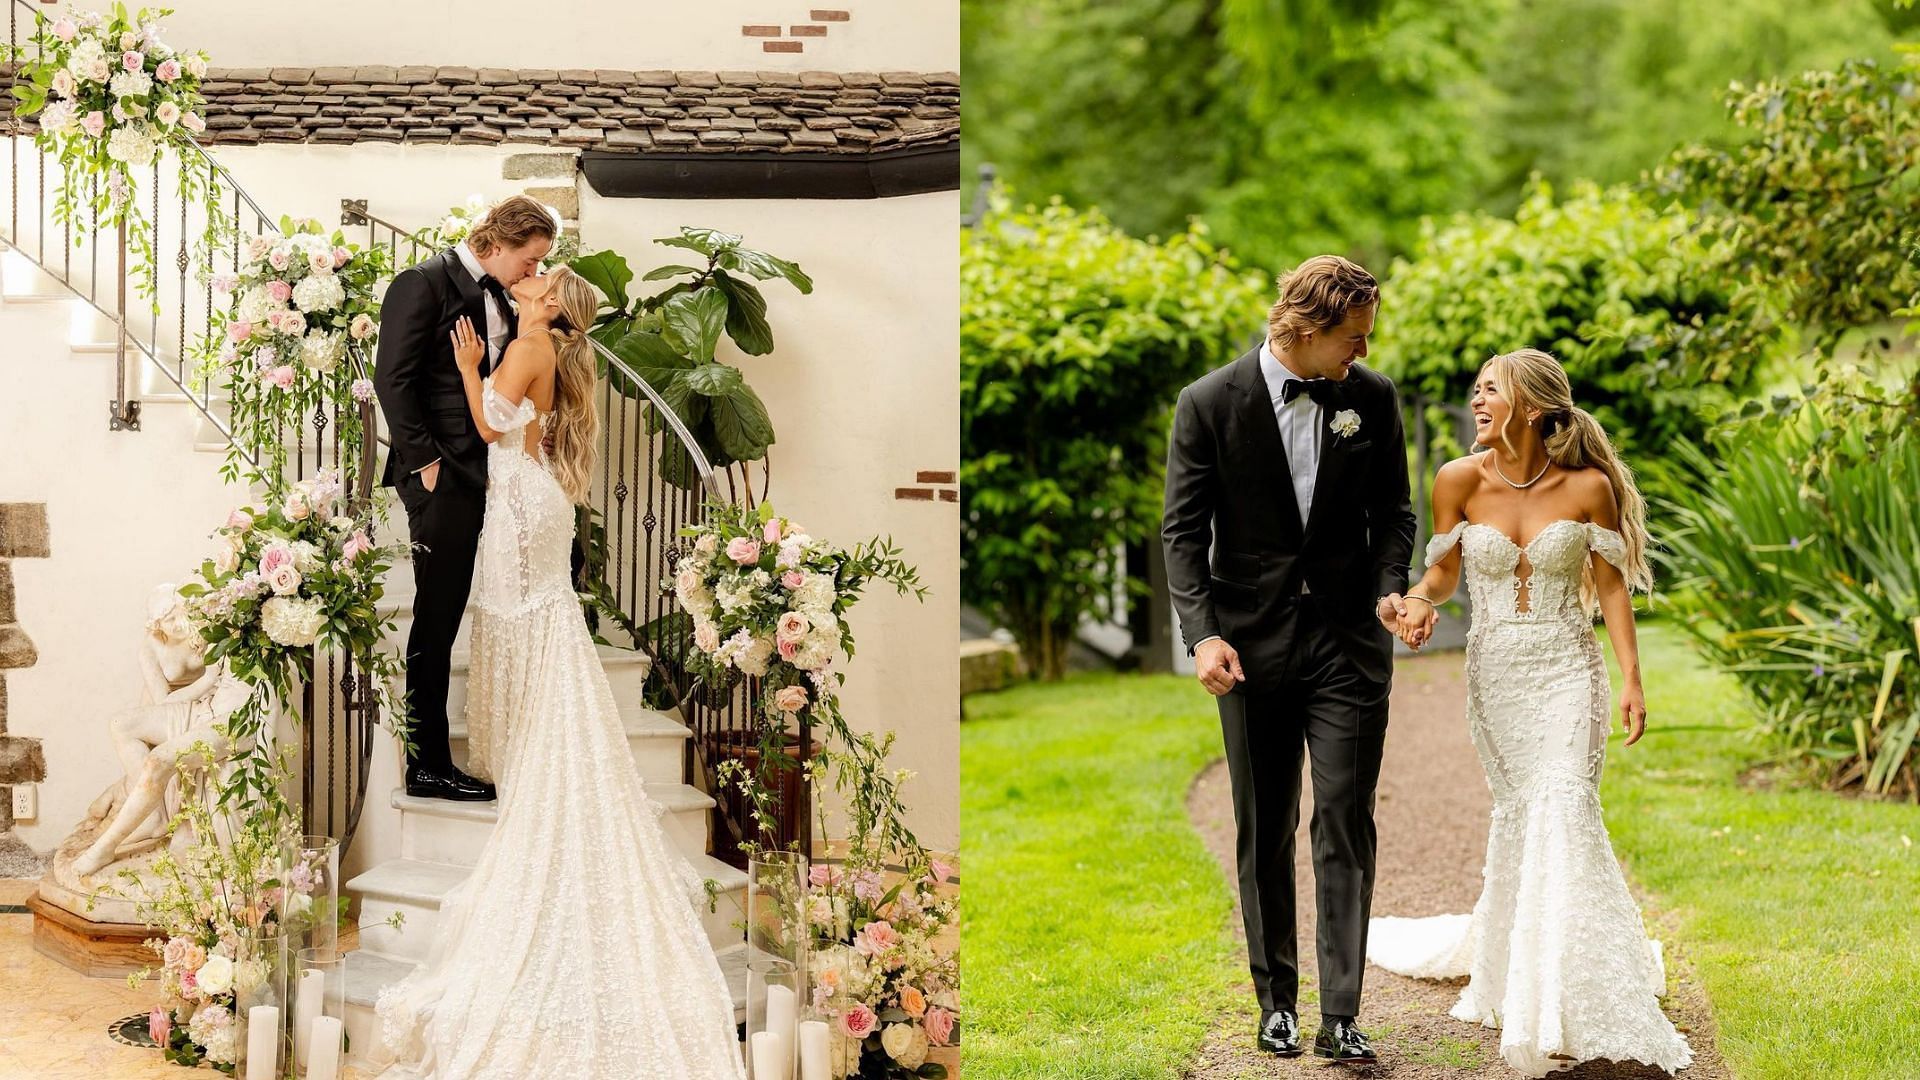 Amy Pickett posted throwback pictures from her wedding day.